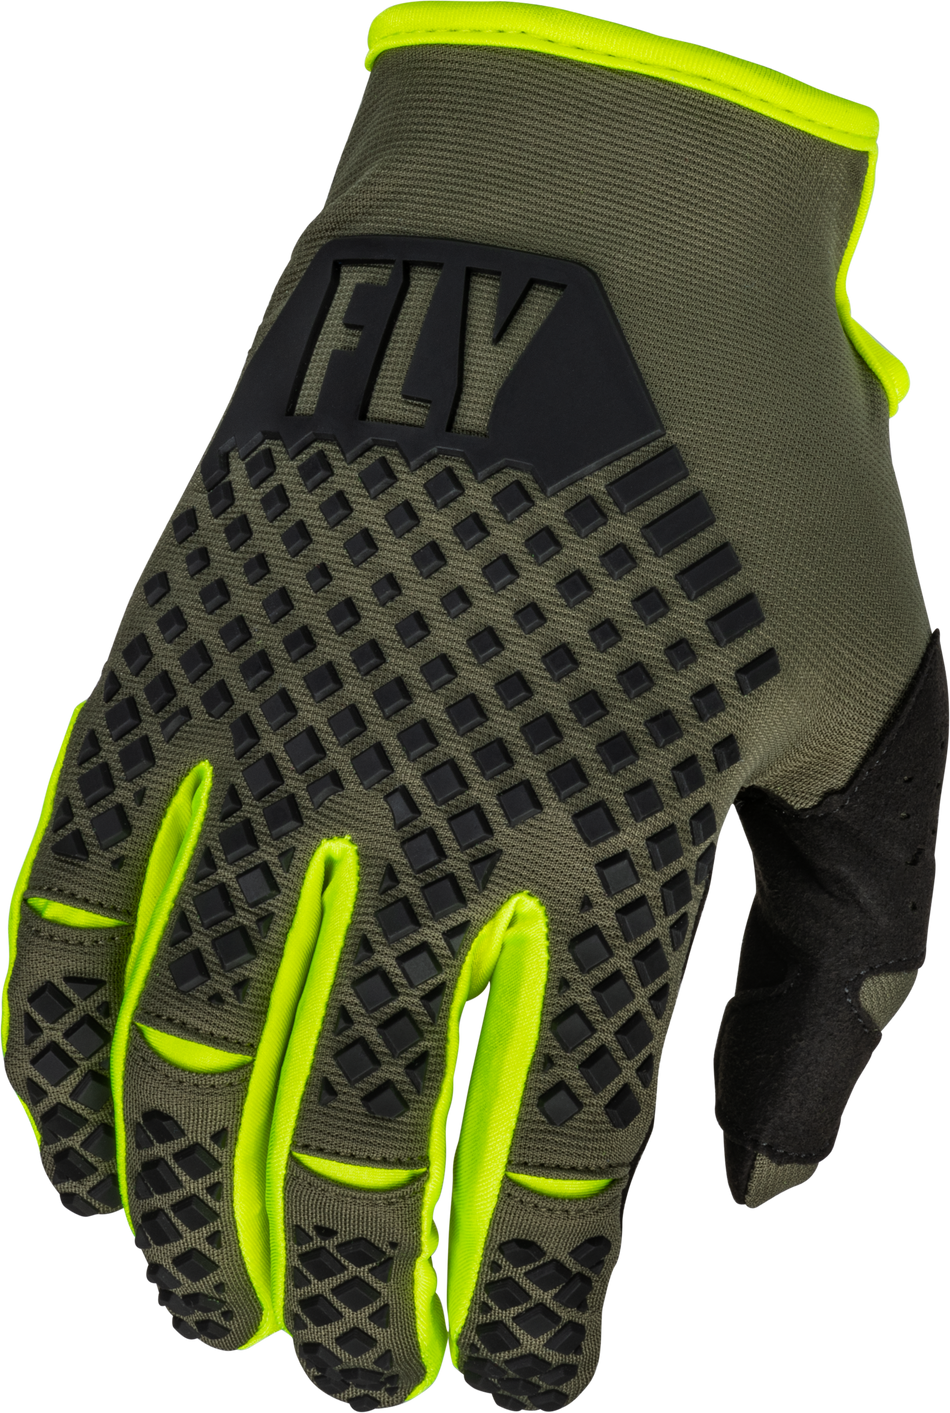 FLY RACING Youth Kinetic Gloves Olive Green/Hi-Vis Yl 376-413YL